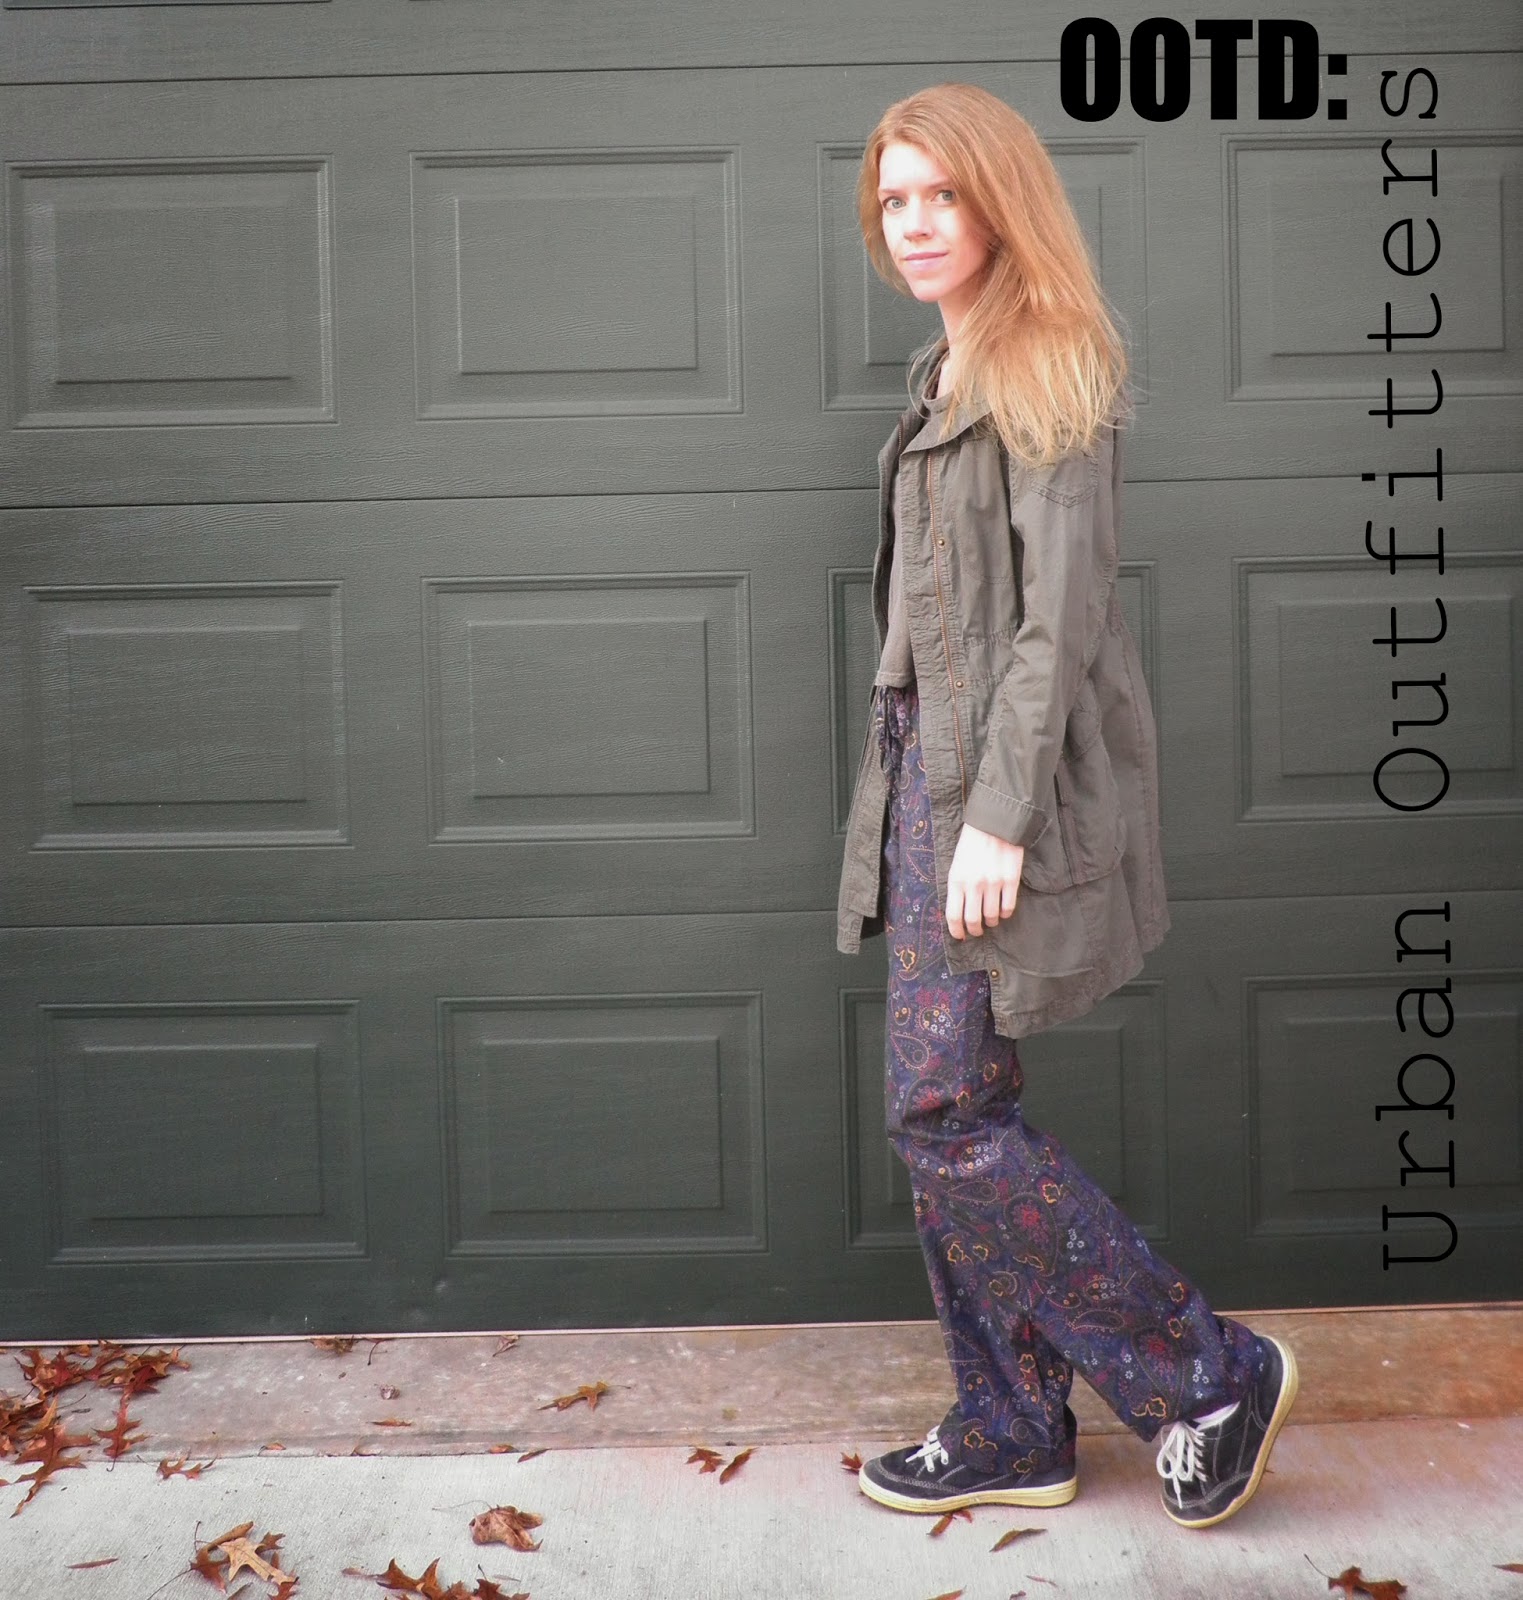 OOTD : Urban Outfitters!